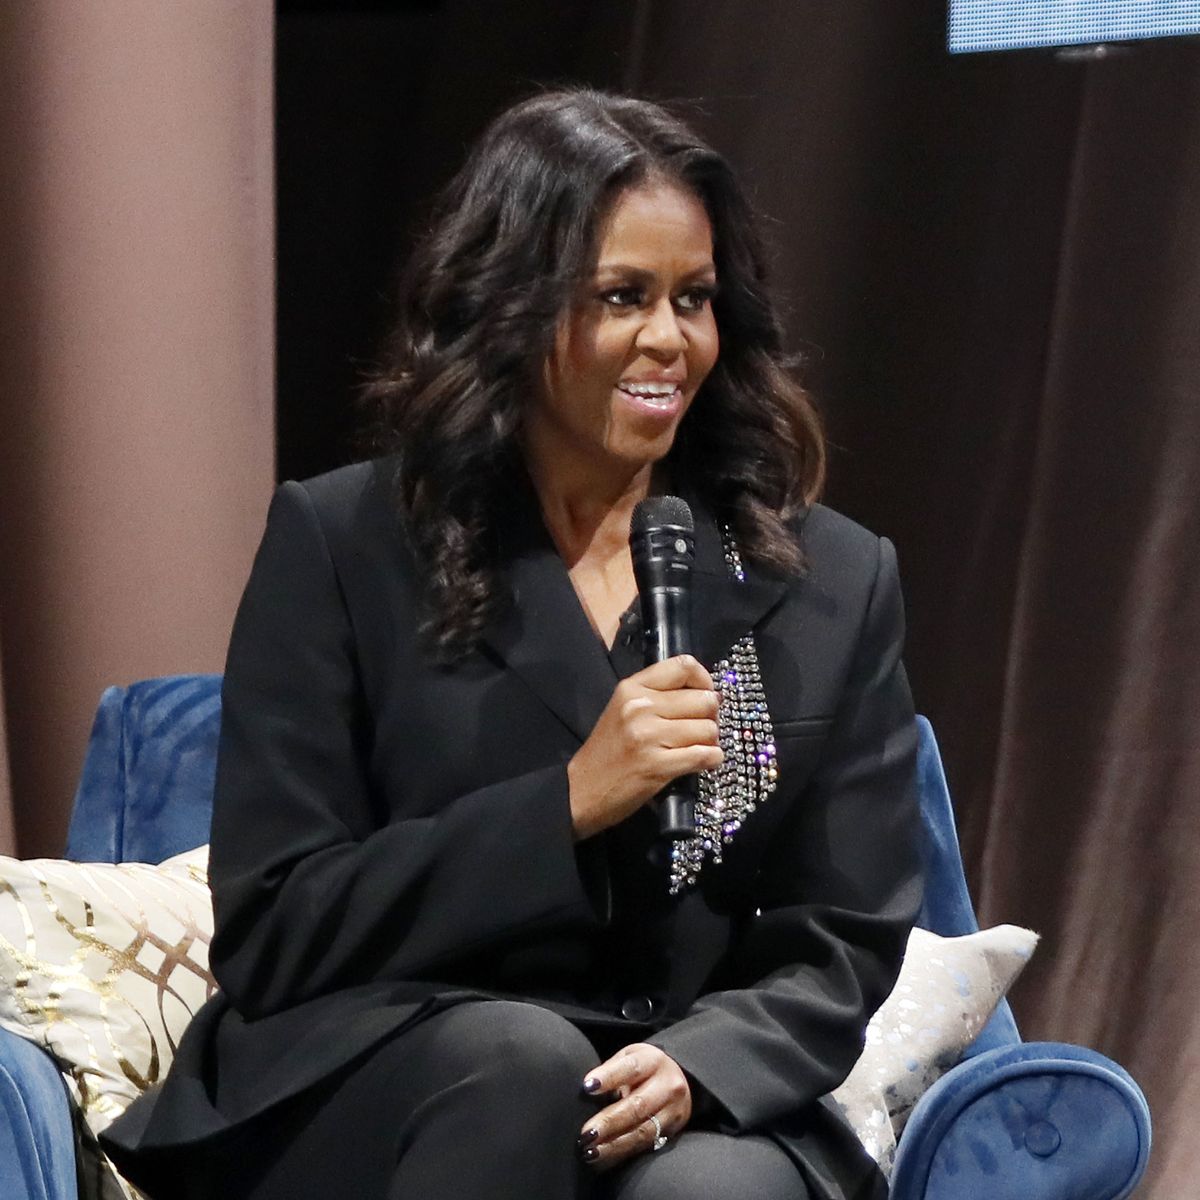 Michelle Obama Discusses Her New Book 'Becoming' With Moderator Valerie Jarrett